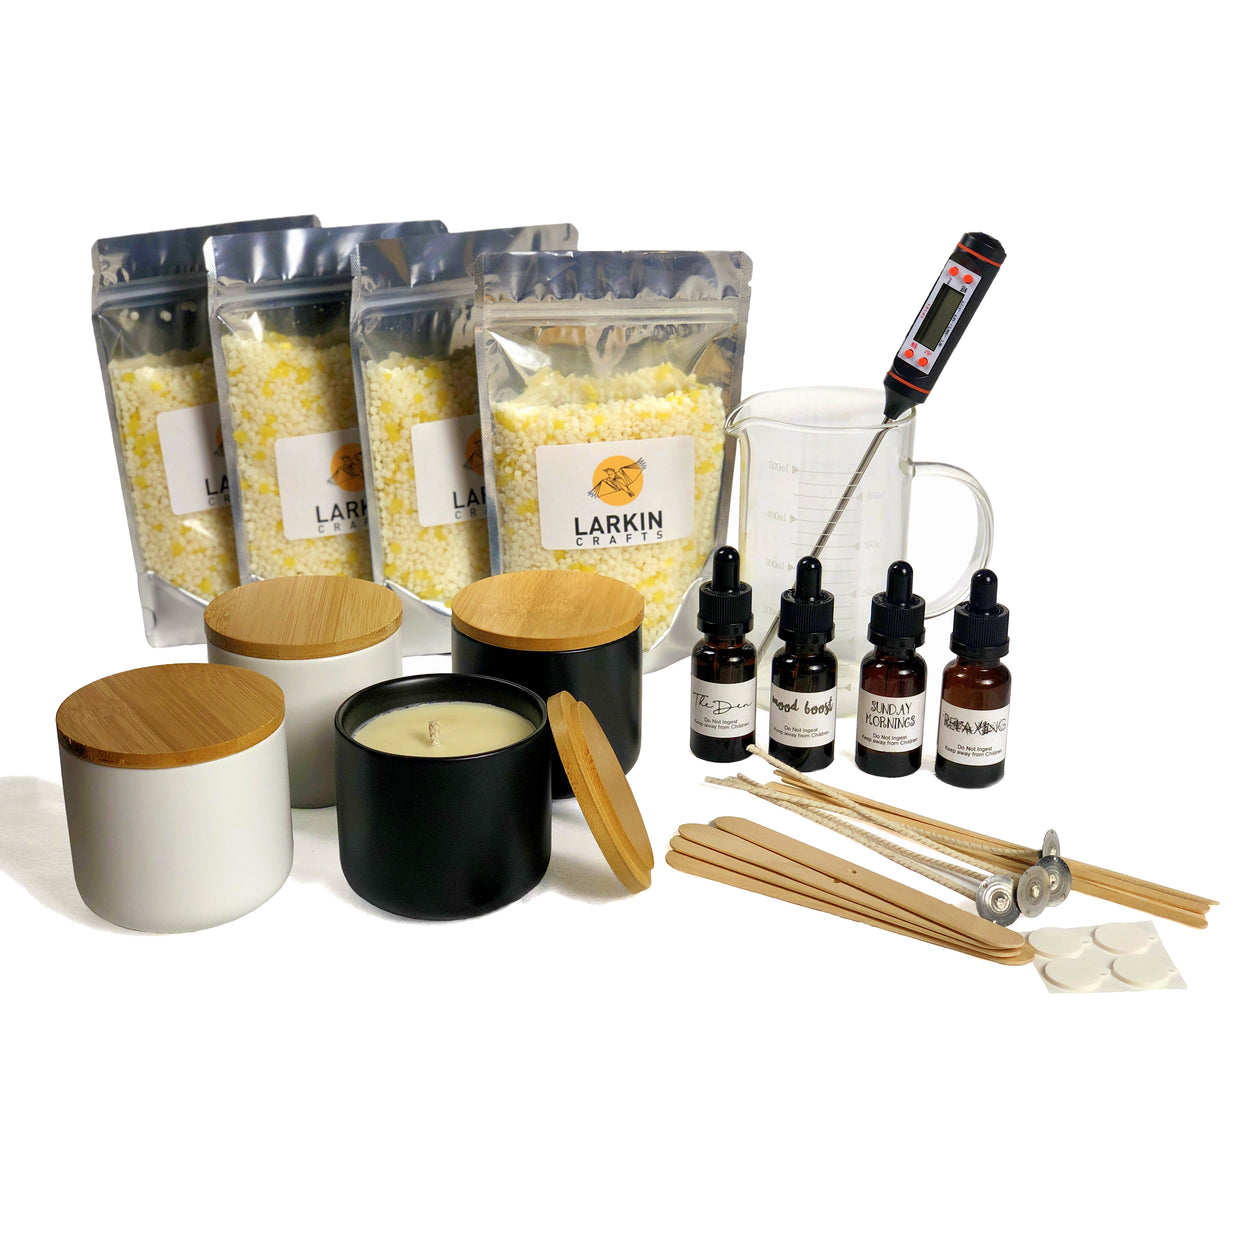 Candle Making Kit for 4 Large Scented Candles